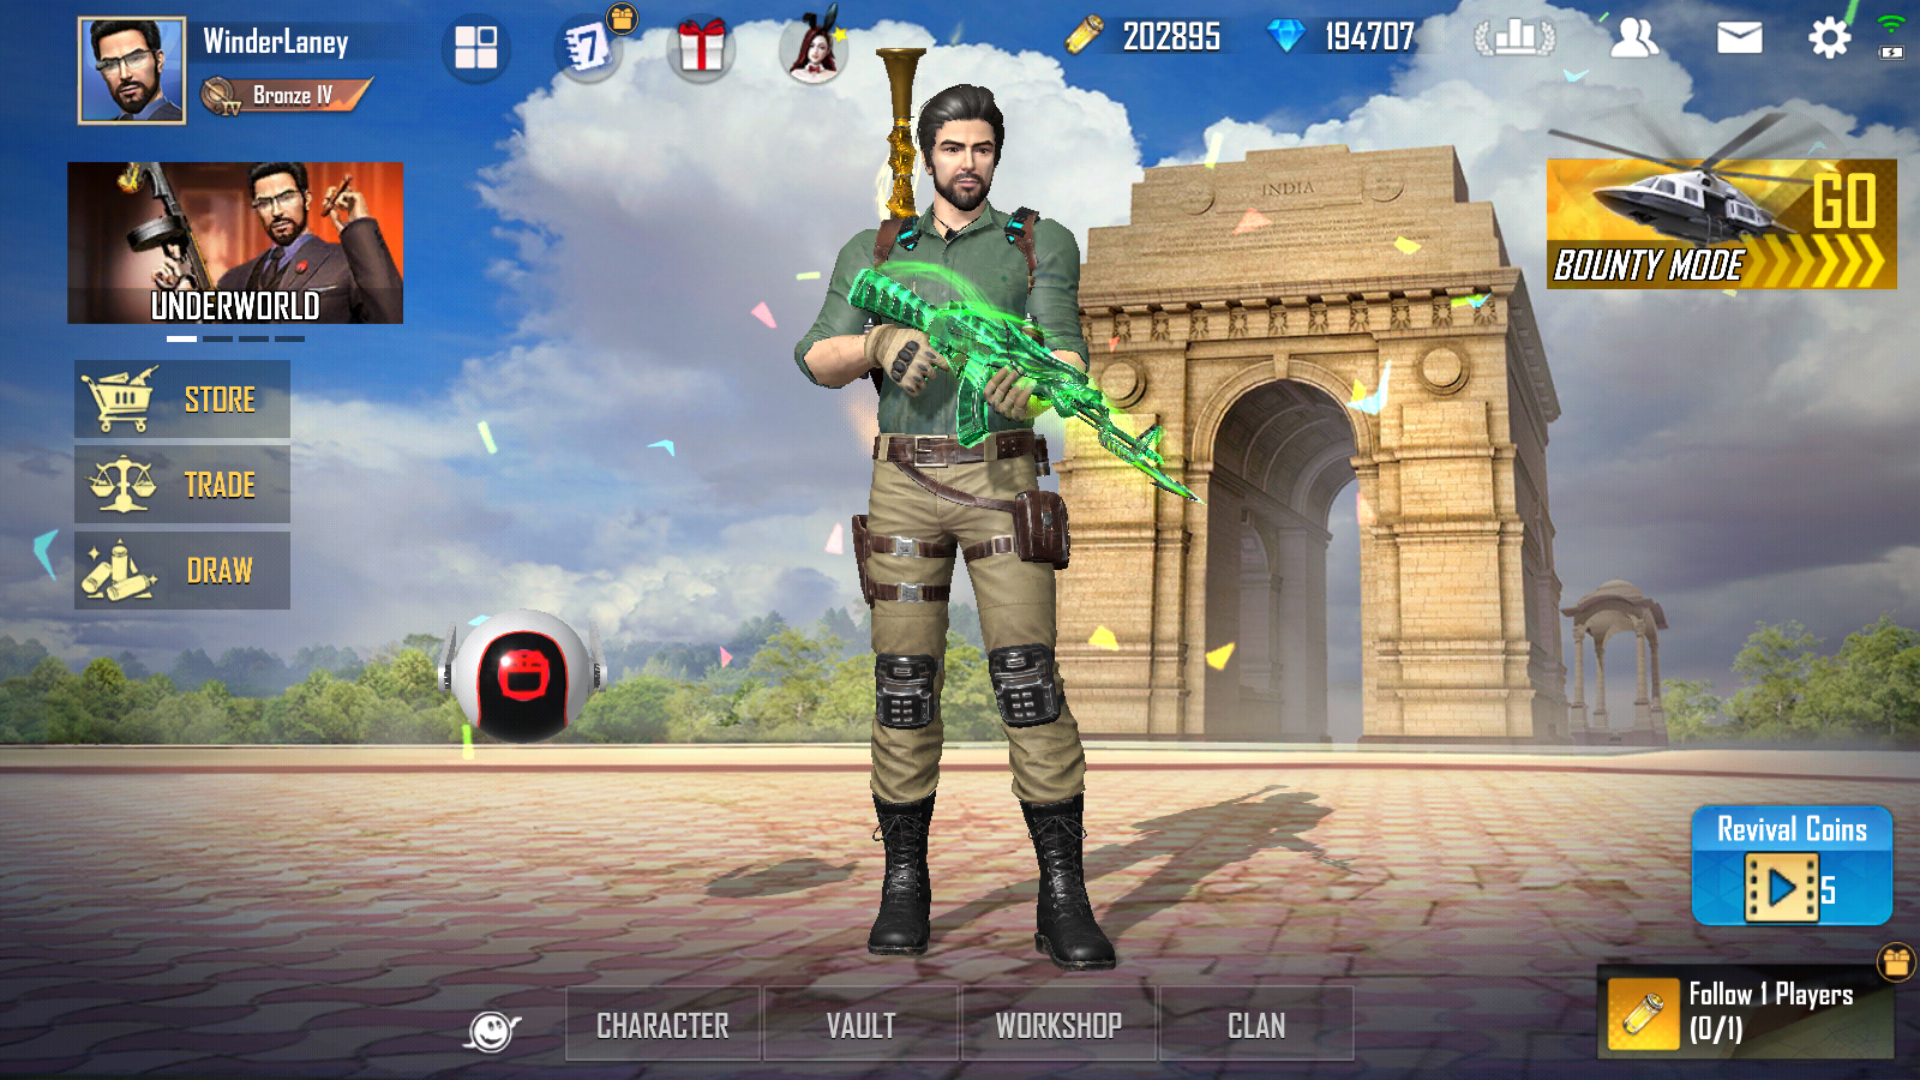 HOW CAN YOU DOWNLOAD RAINBOW SIX MOBILE! REQUIREMENTS TO PLAY AND BATTLE  PASS 